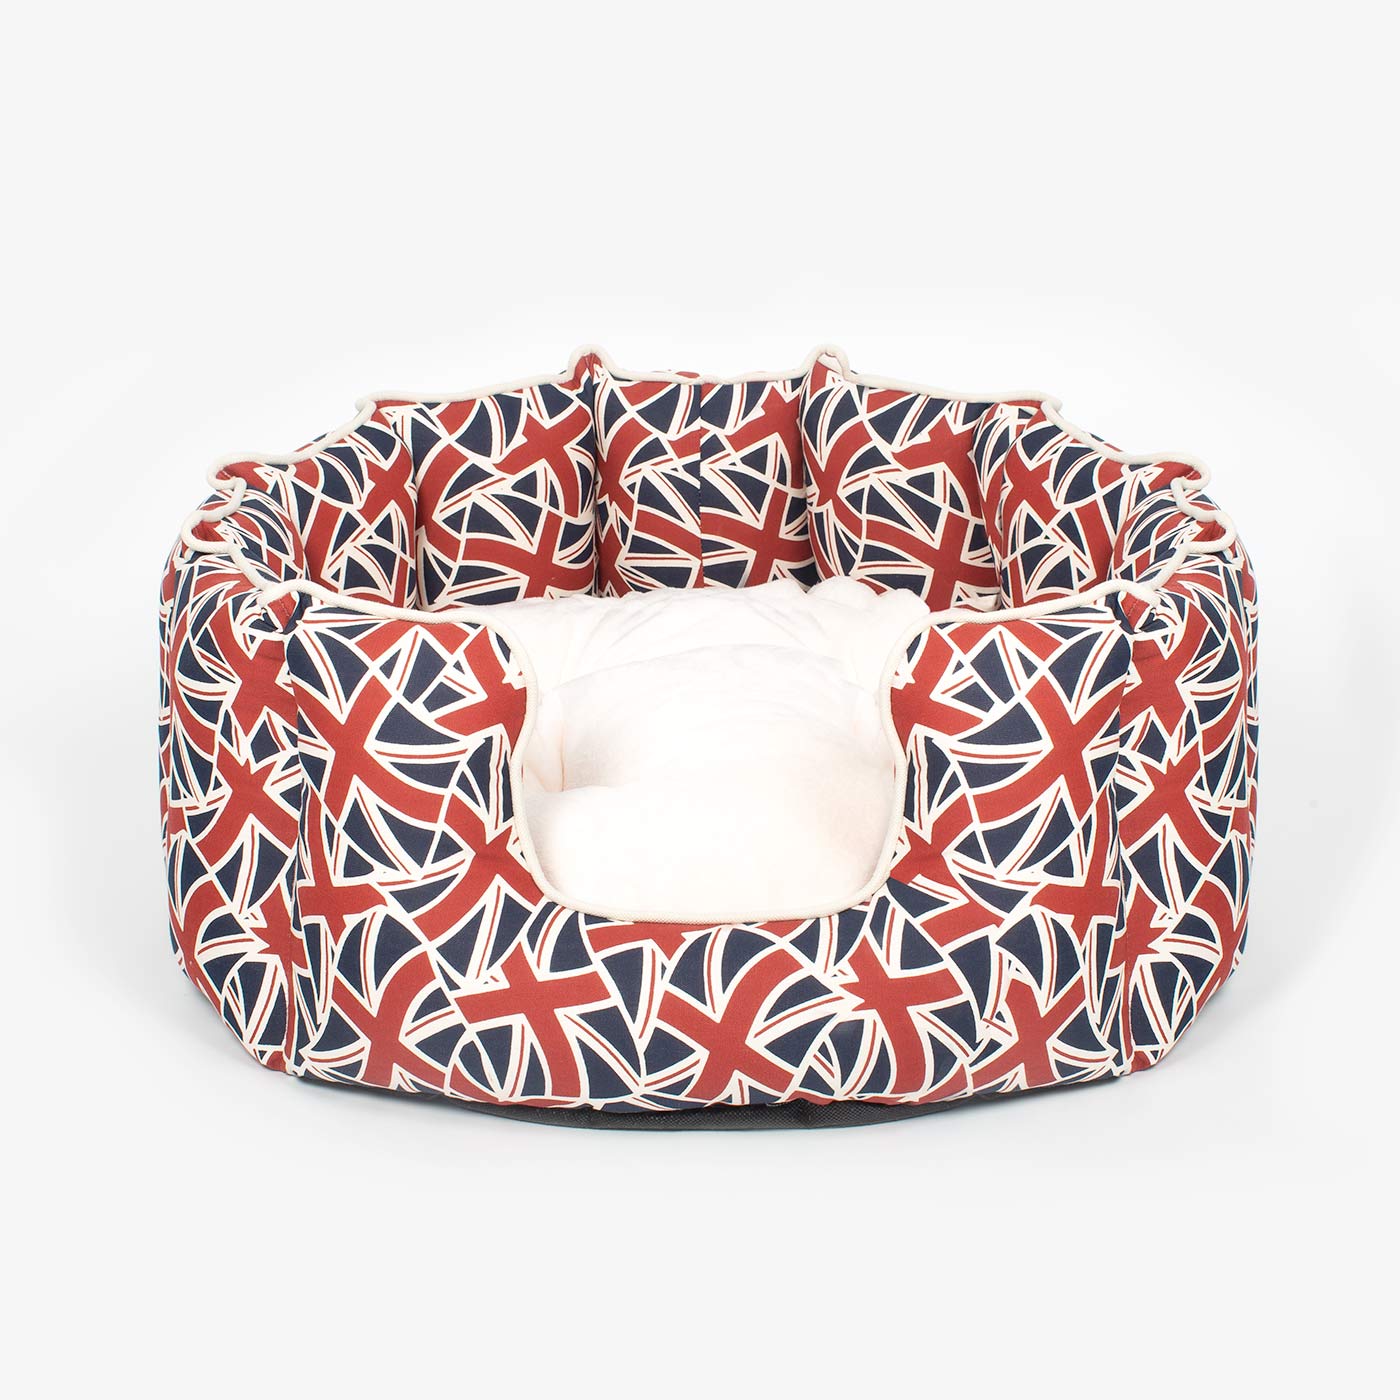 Union Jack High Wall Bed For Dogs by Lords & Labradors